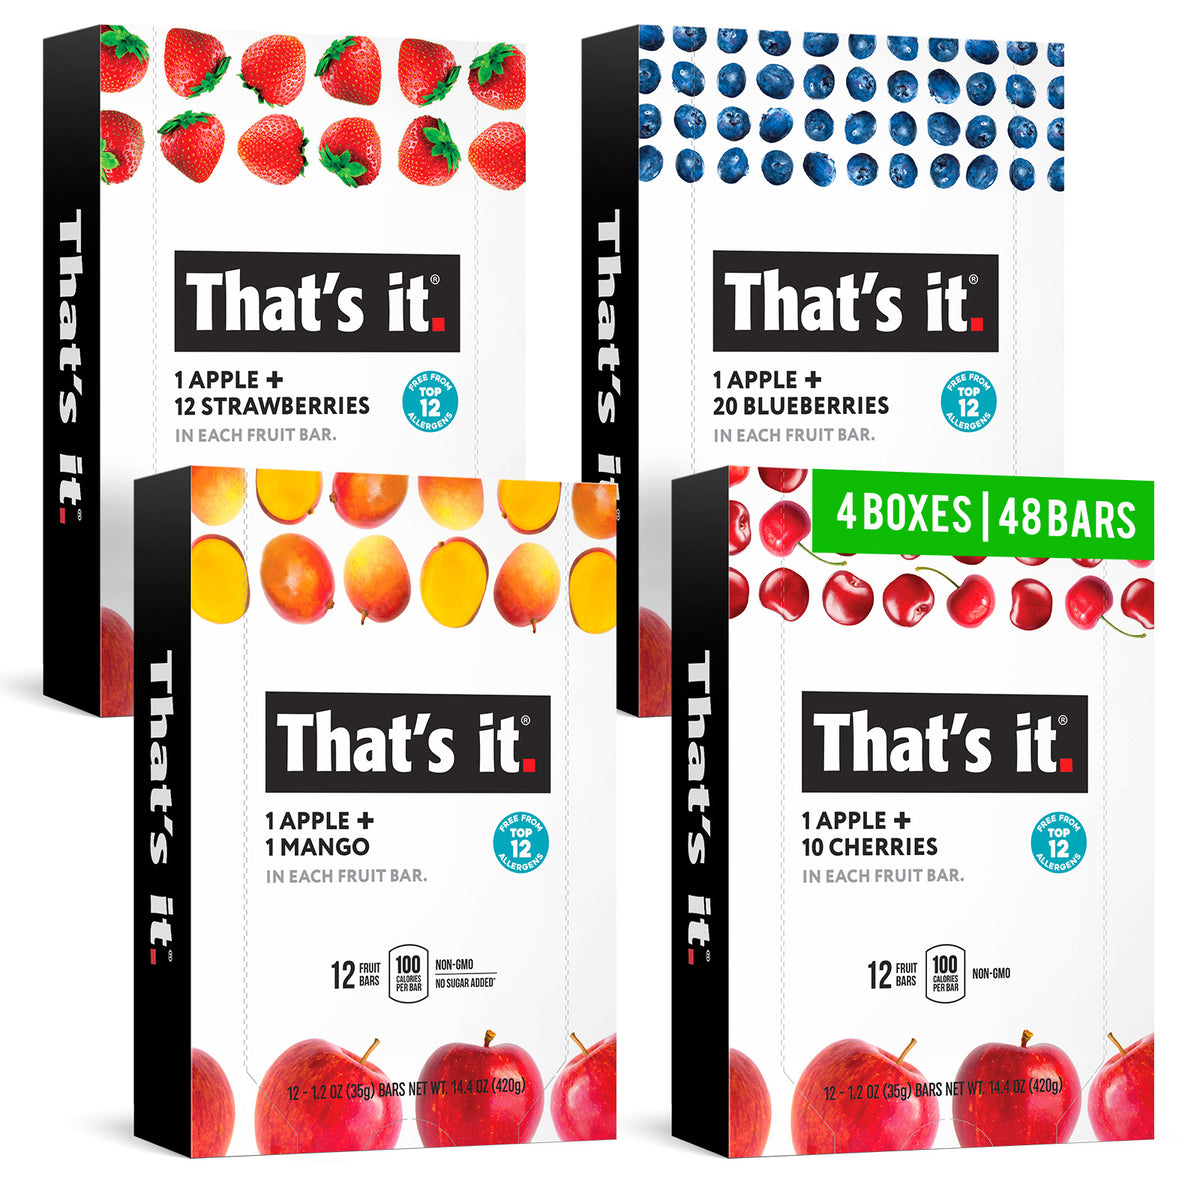 4 BOXES, 48 BARS. I 12ct box of Strawberry, Blueberry, Mango and Cherry That's it. Fruit Bars